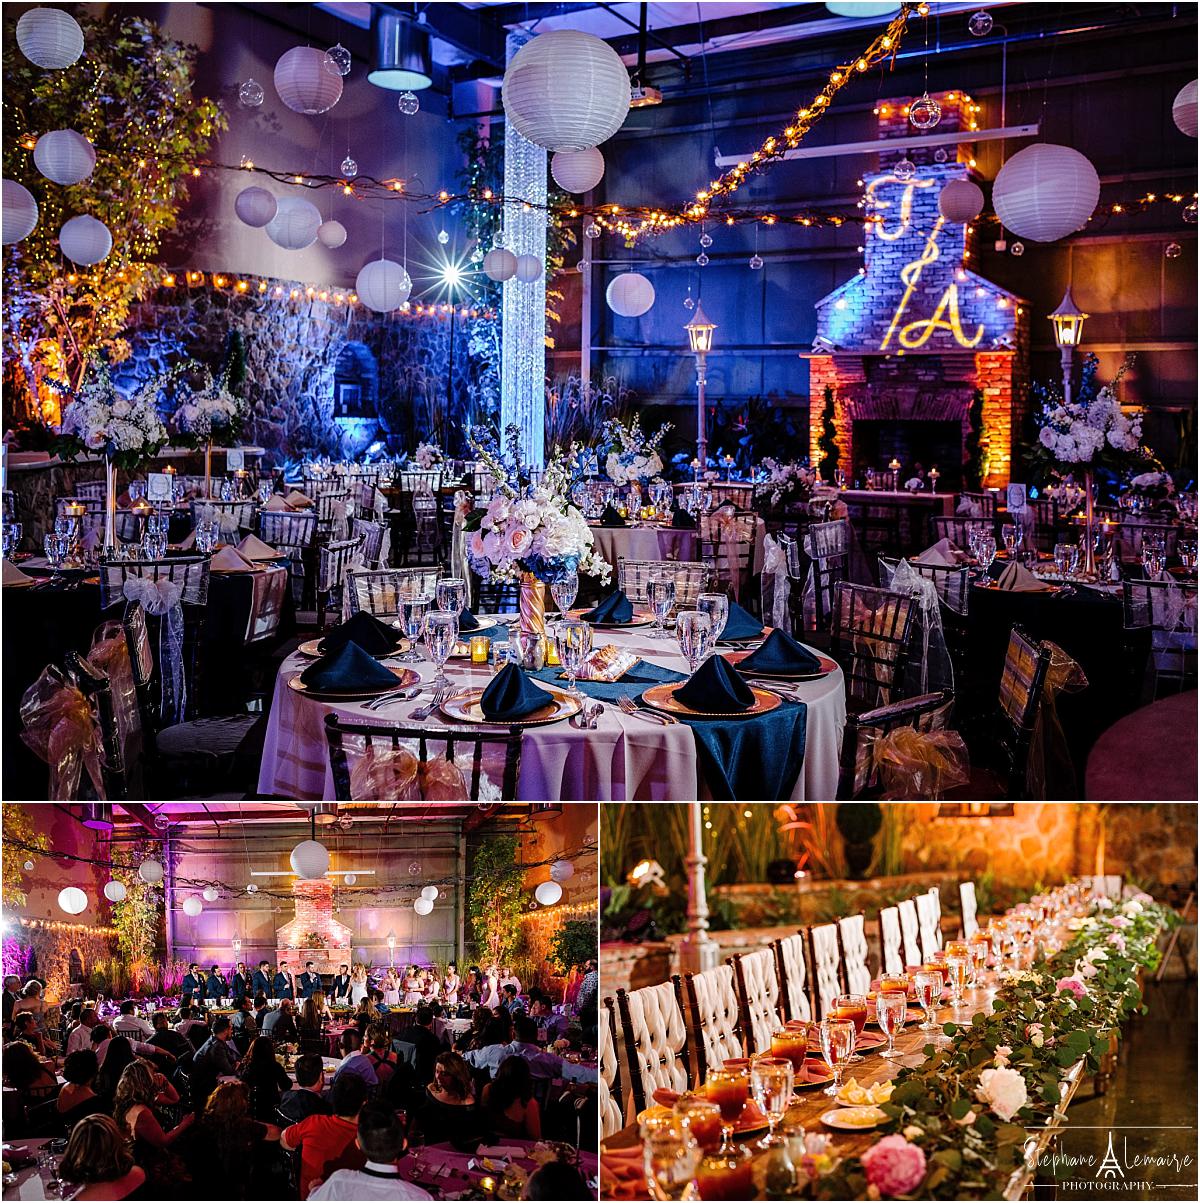 wedding reception at 150 sunset wedding venue in el paso texas by stephane lemaire photography